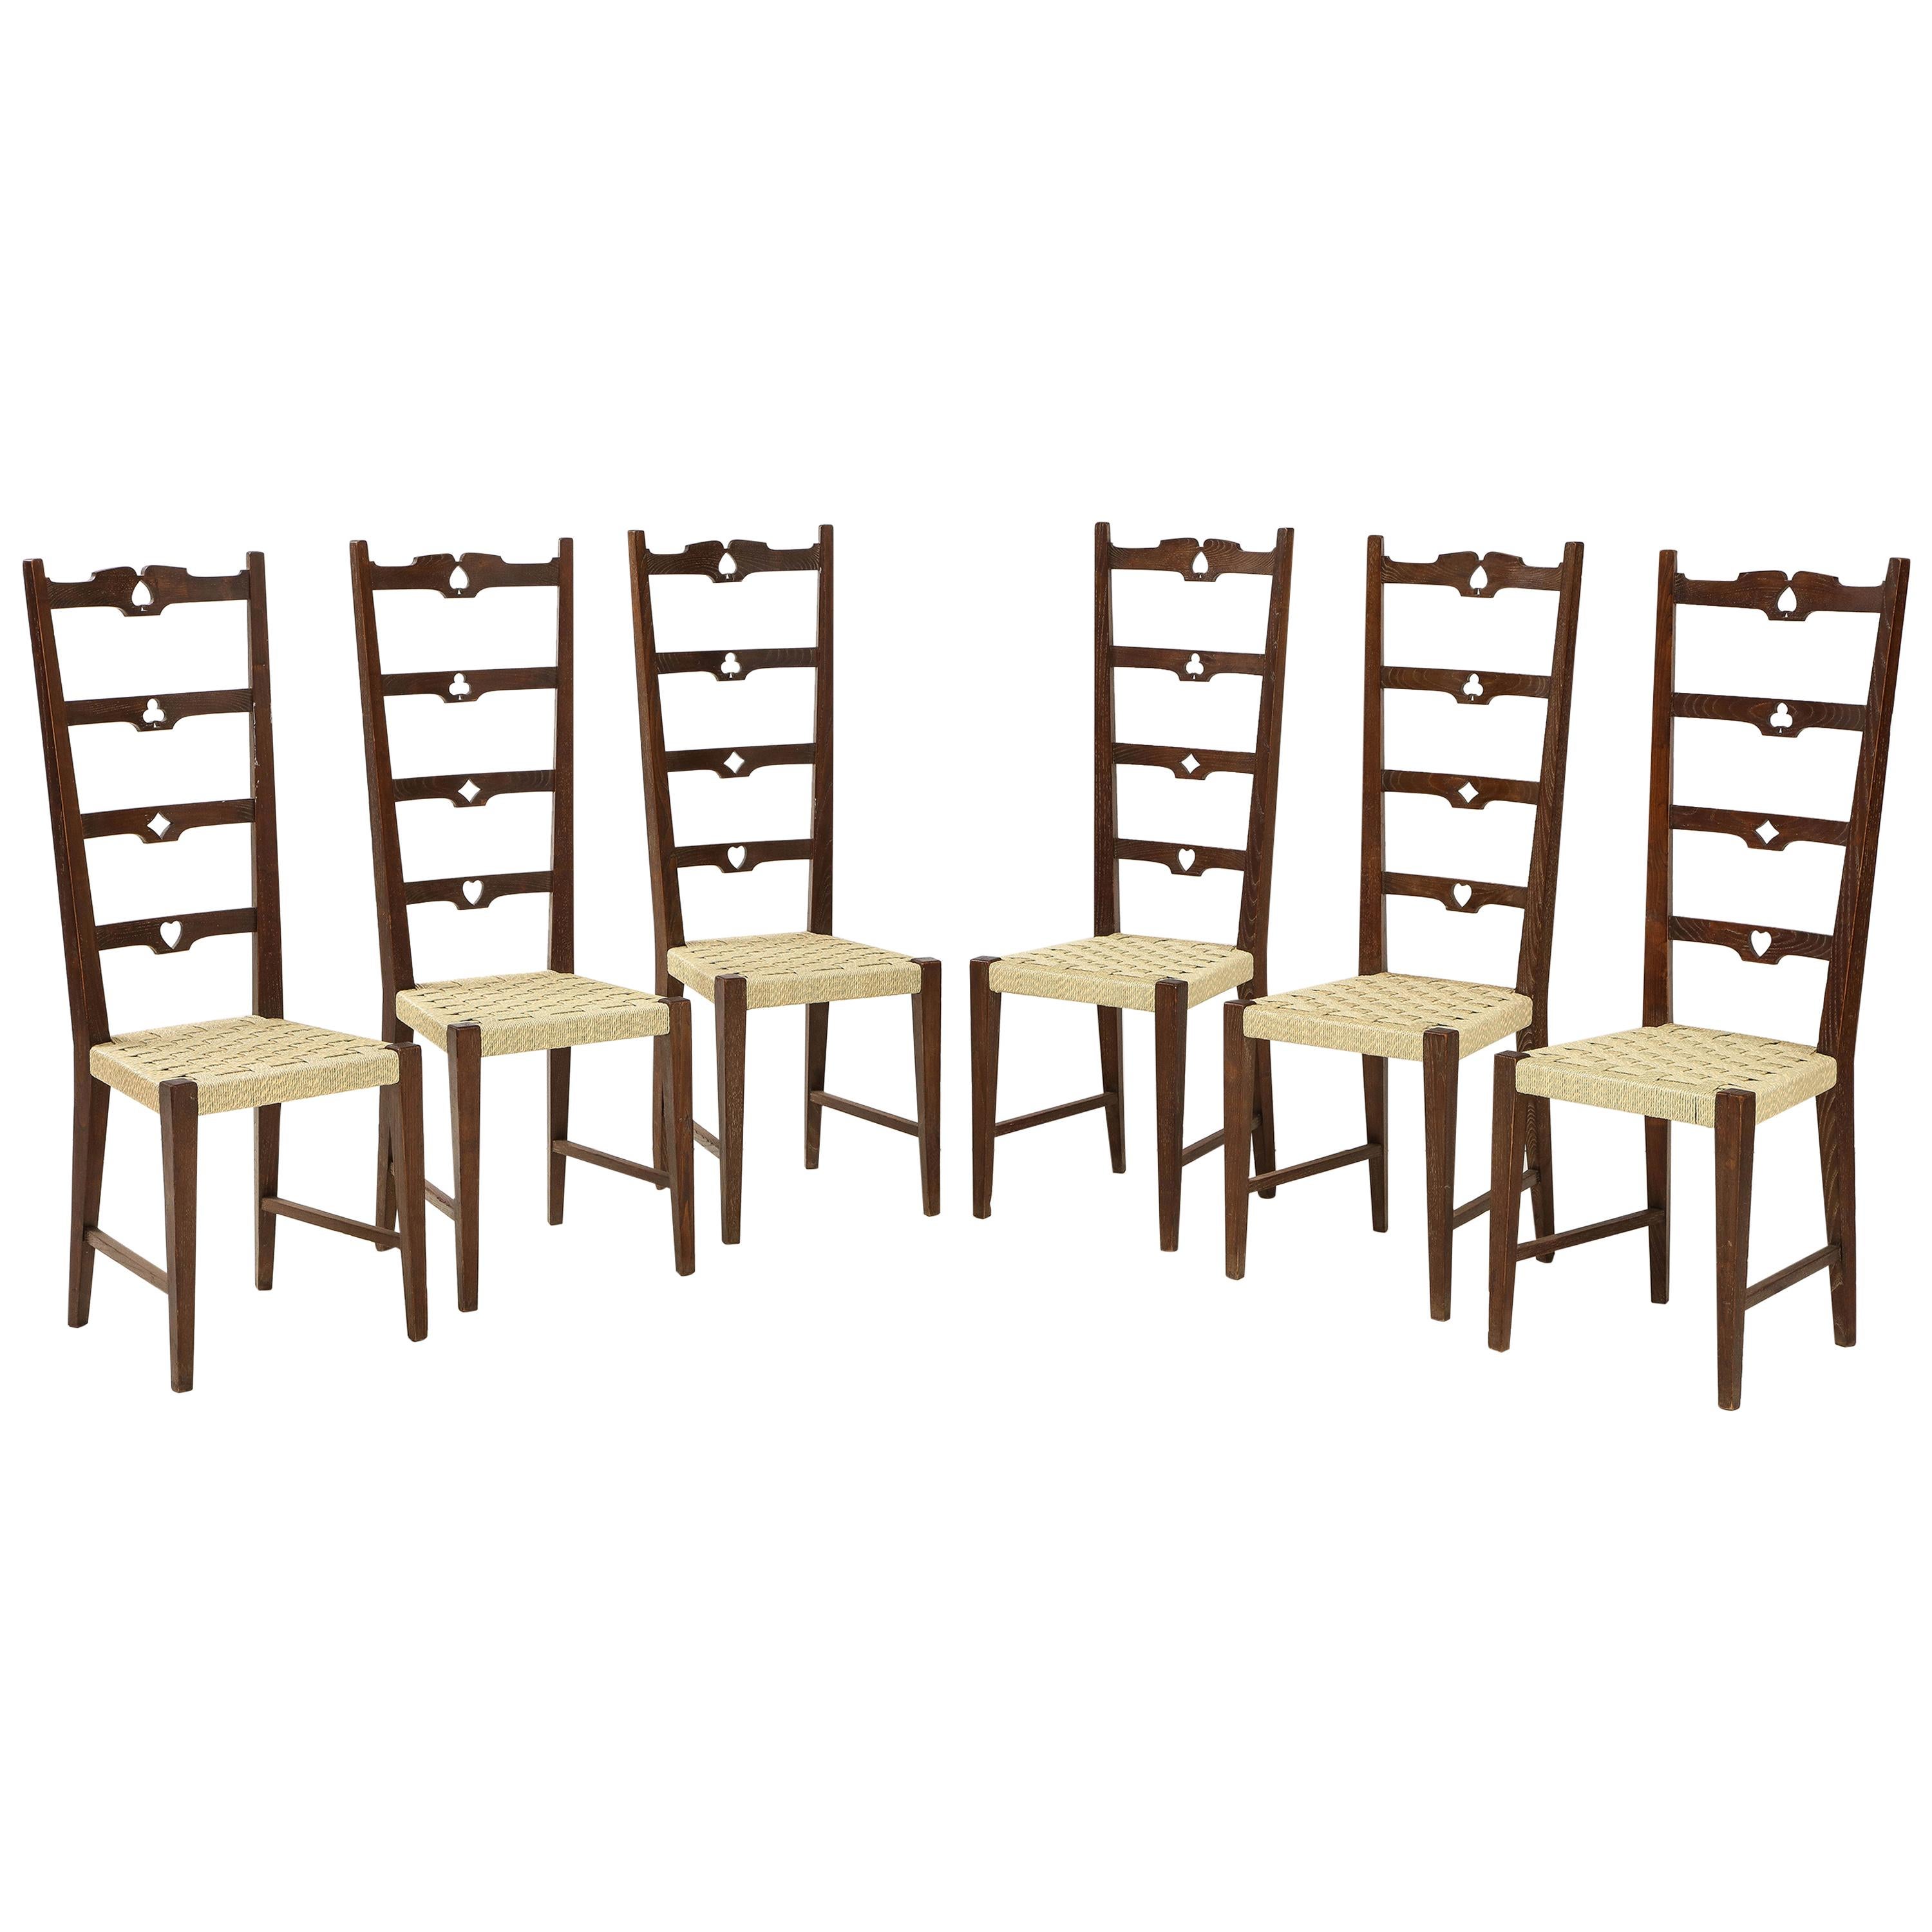 Set of Six Italian Walnut Rustic Ladder Back Chairs with Playing Card Motif For Sale